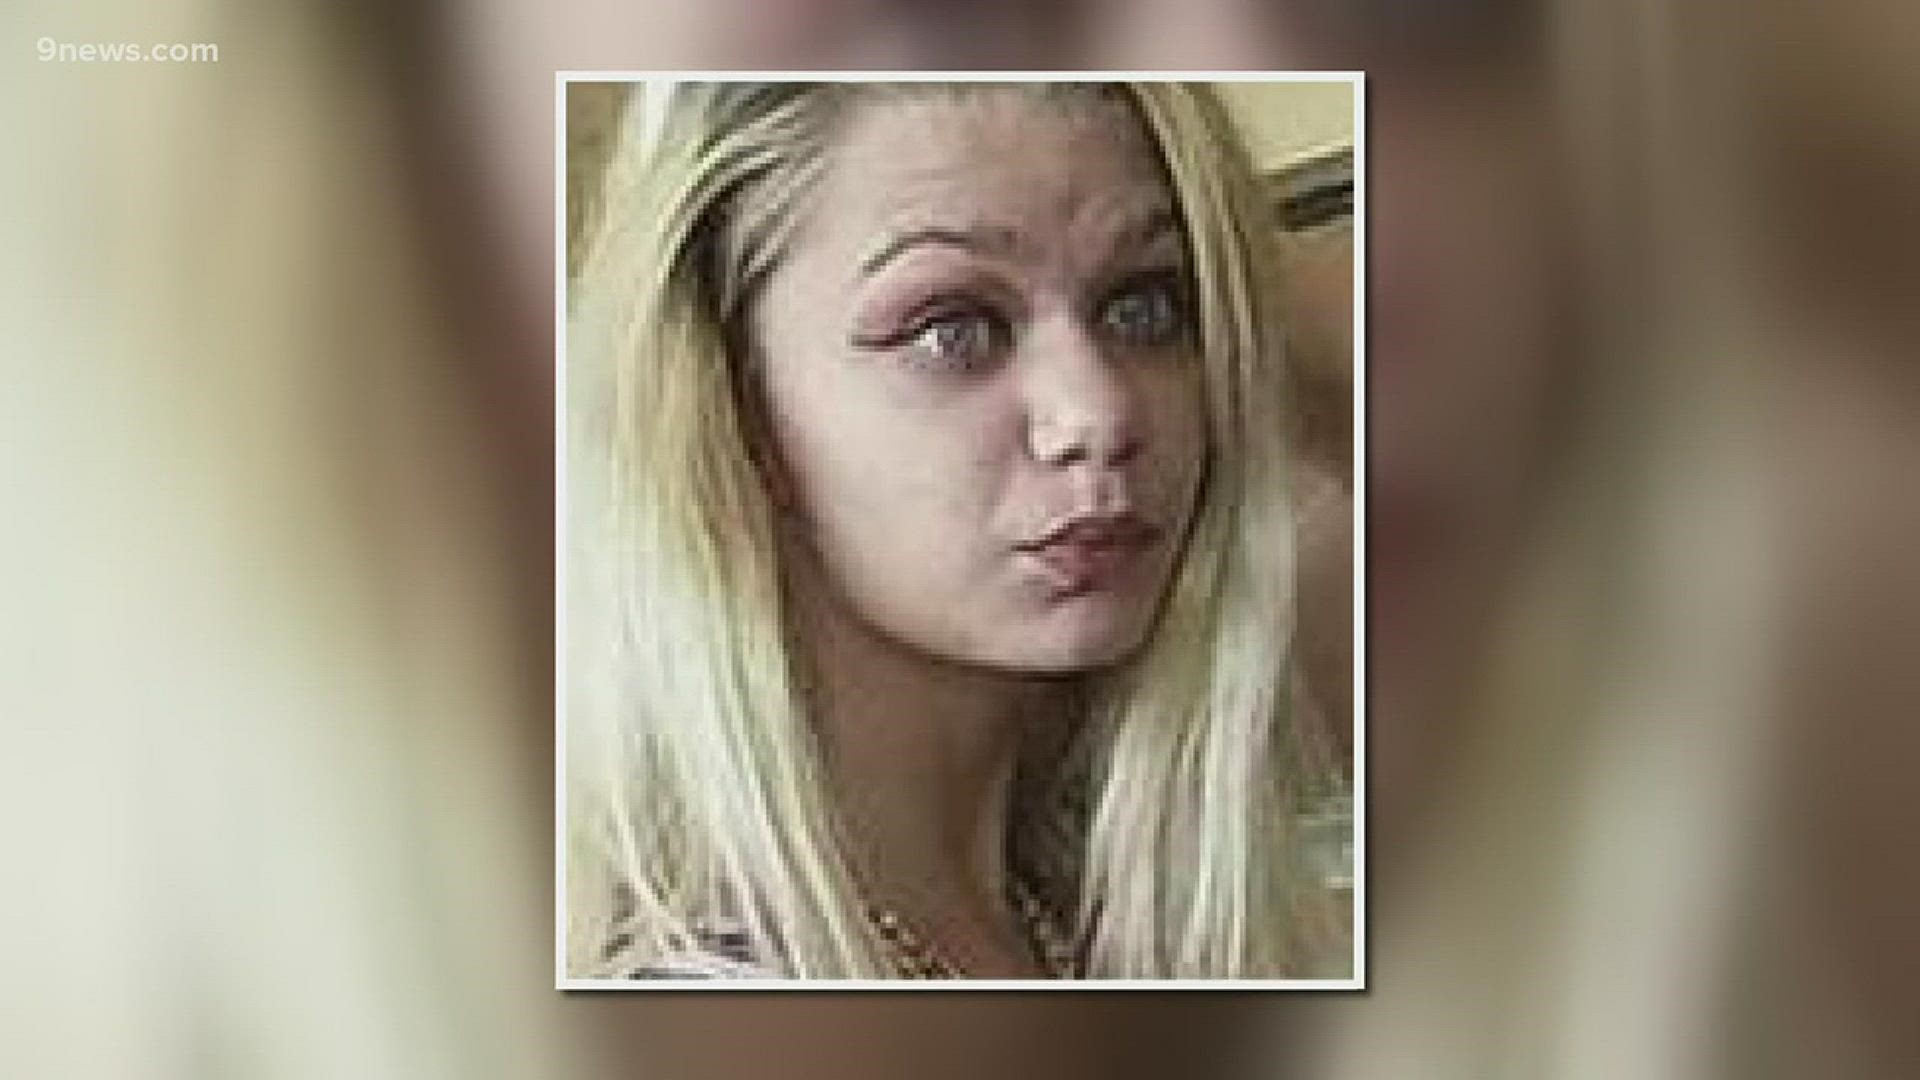 Dayna Dilauro was last seen at her home in Fort Pierce, Florida, on Dec. 16 of last year, the center said. Family members believe she may be in the company of an adult man and that both of them could be on their way to the Denver area.